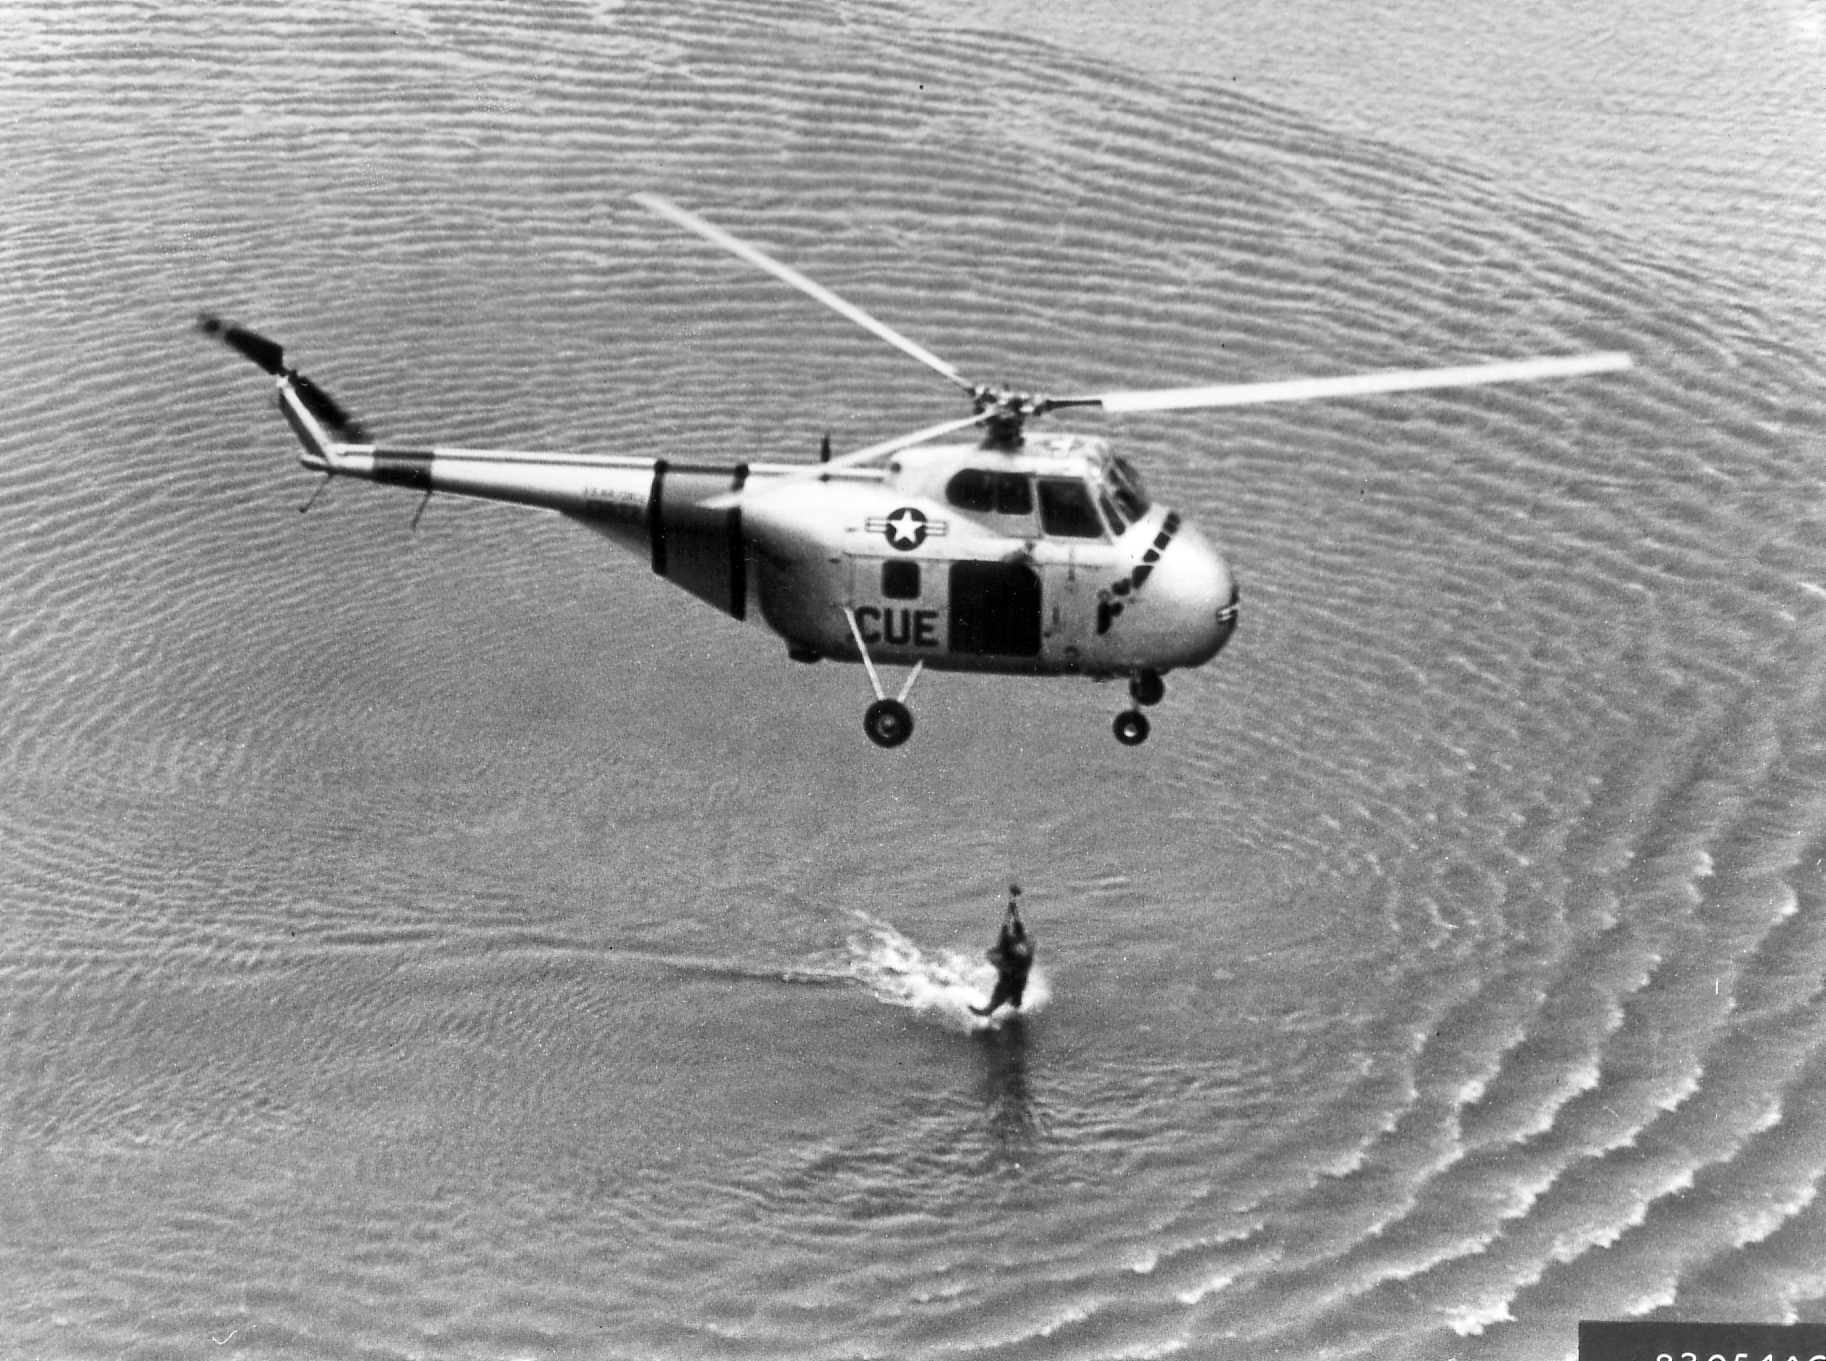 3rd ARG SH-19B hoists CAPT Joseph C. McConnell, Jr., USAF, from waters of the Yellow Sea, 12 April 1953. (U.S. Air Force)